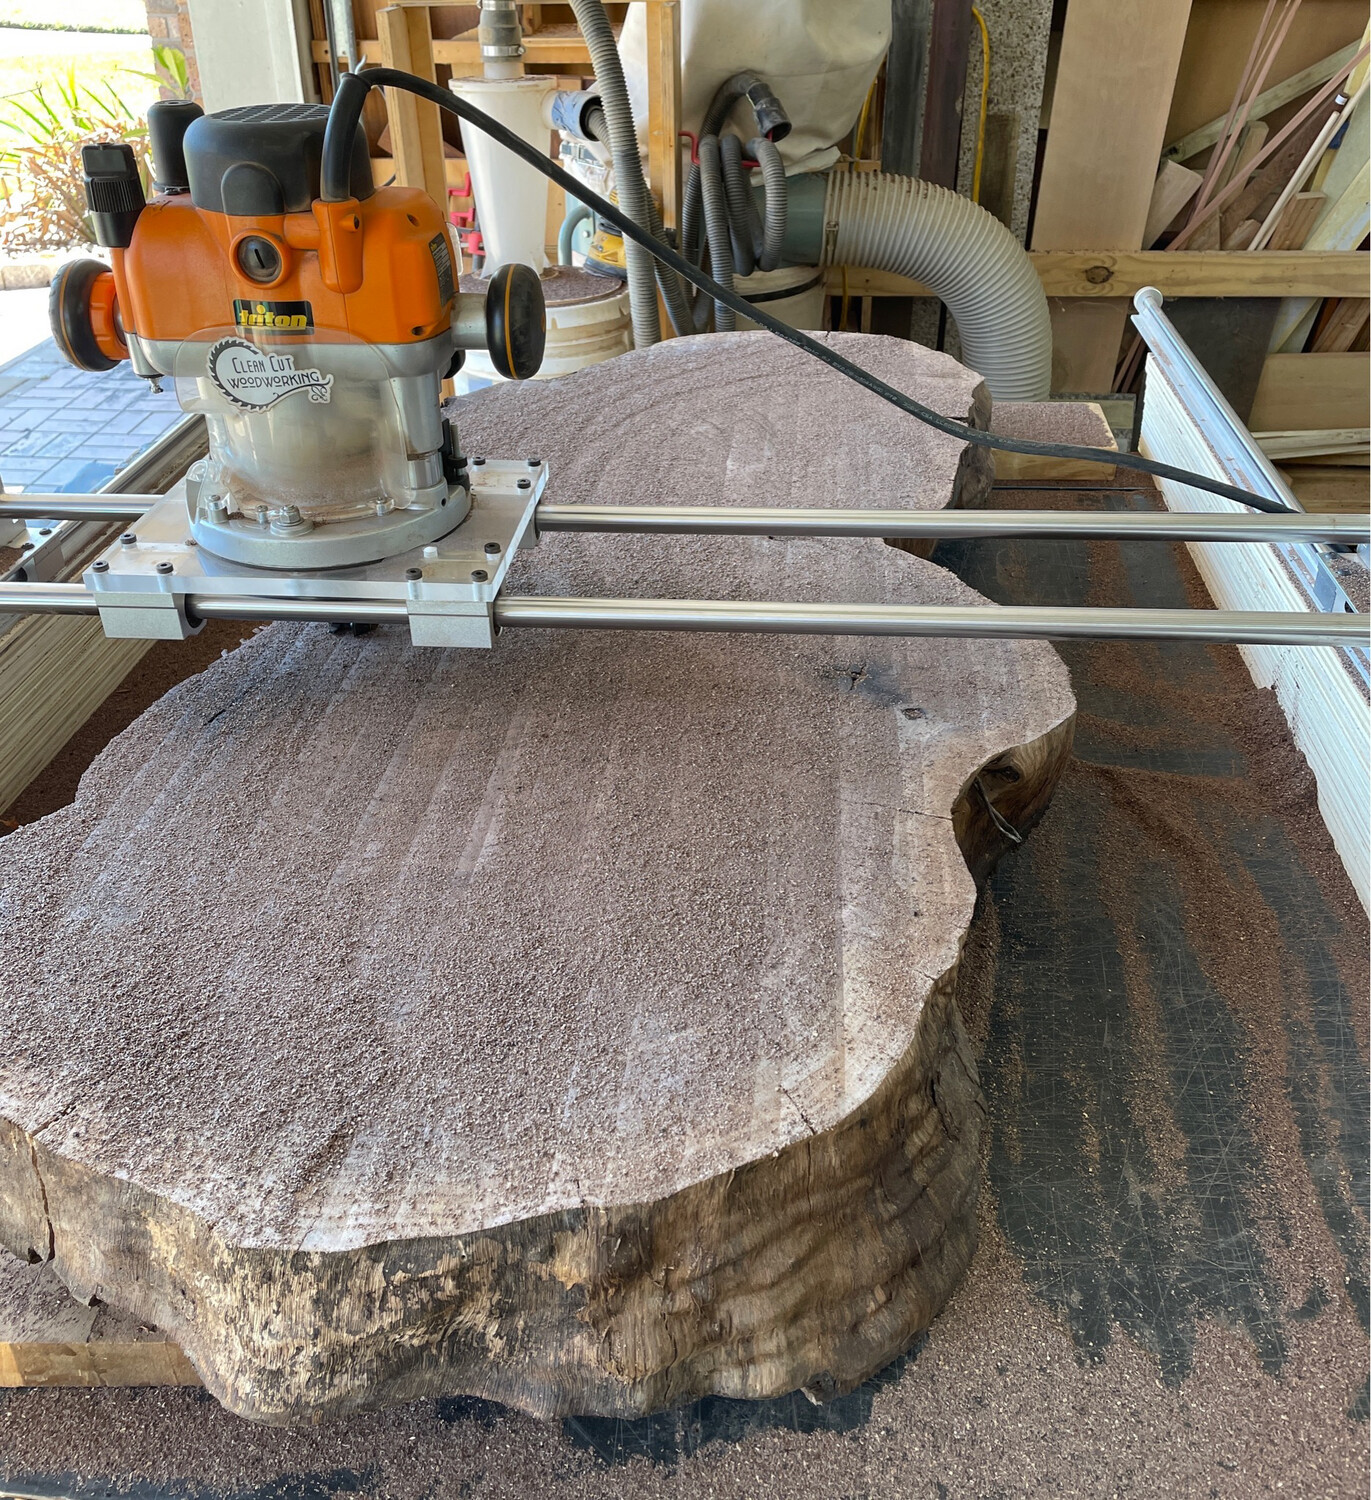 30" Wide Woodworking Router Sled